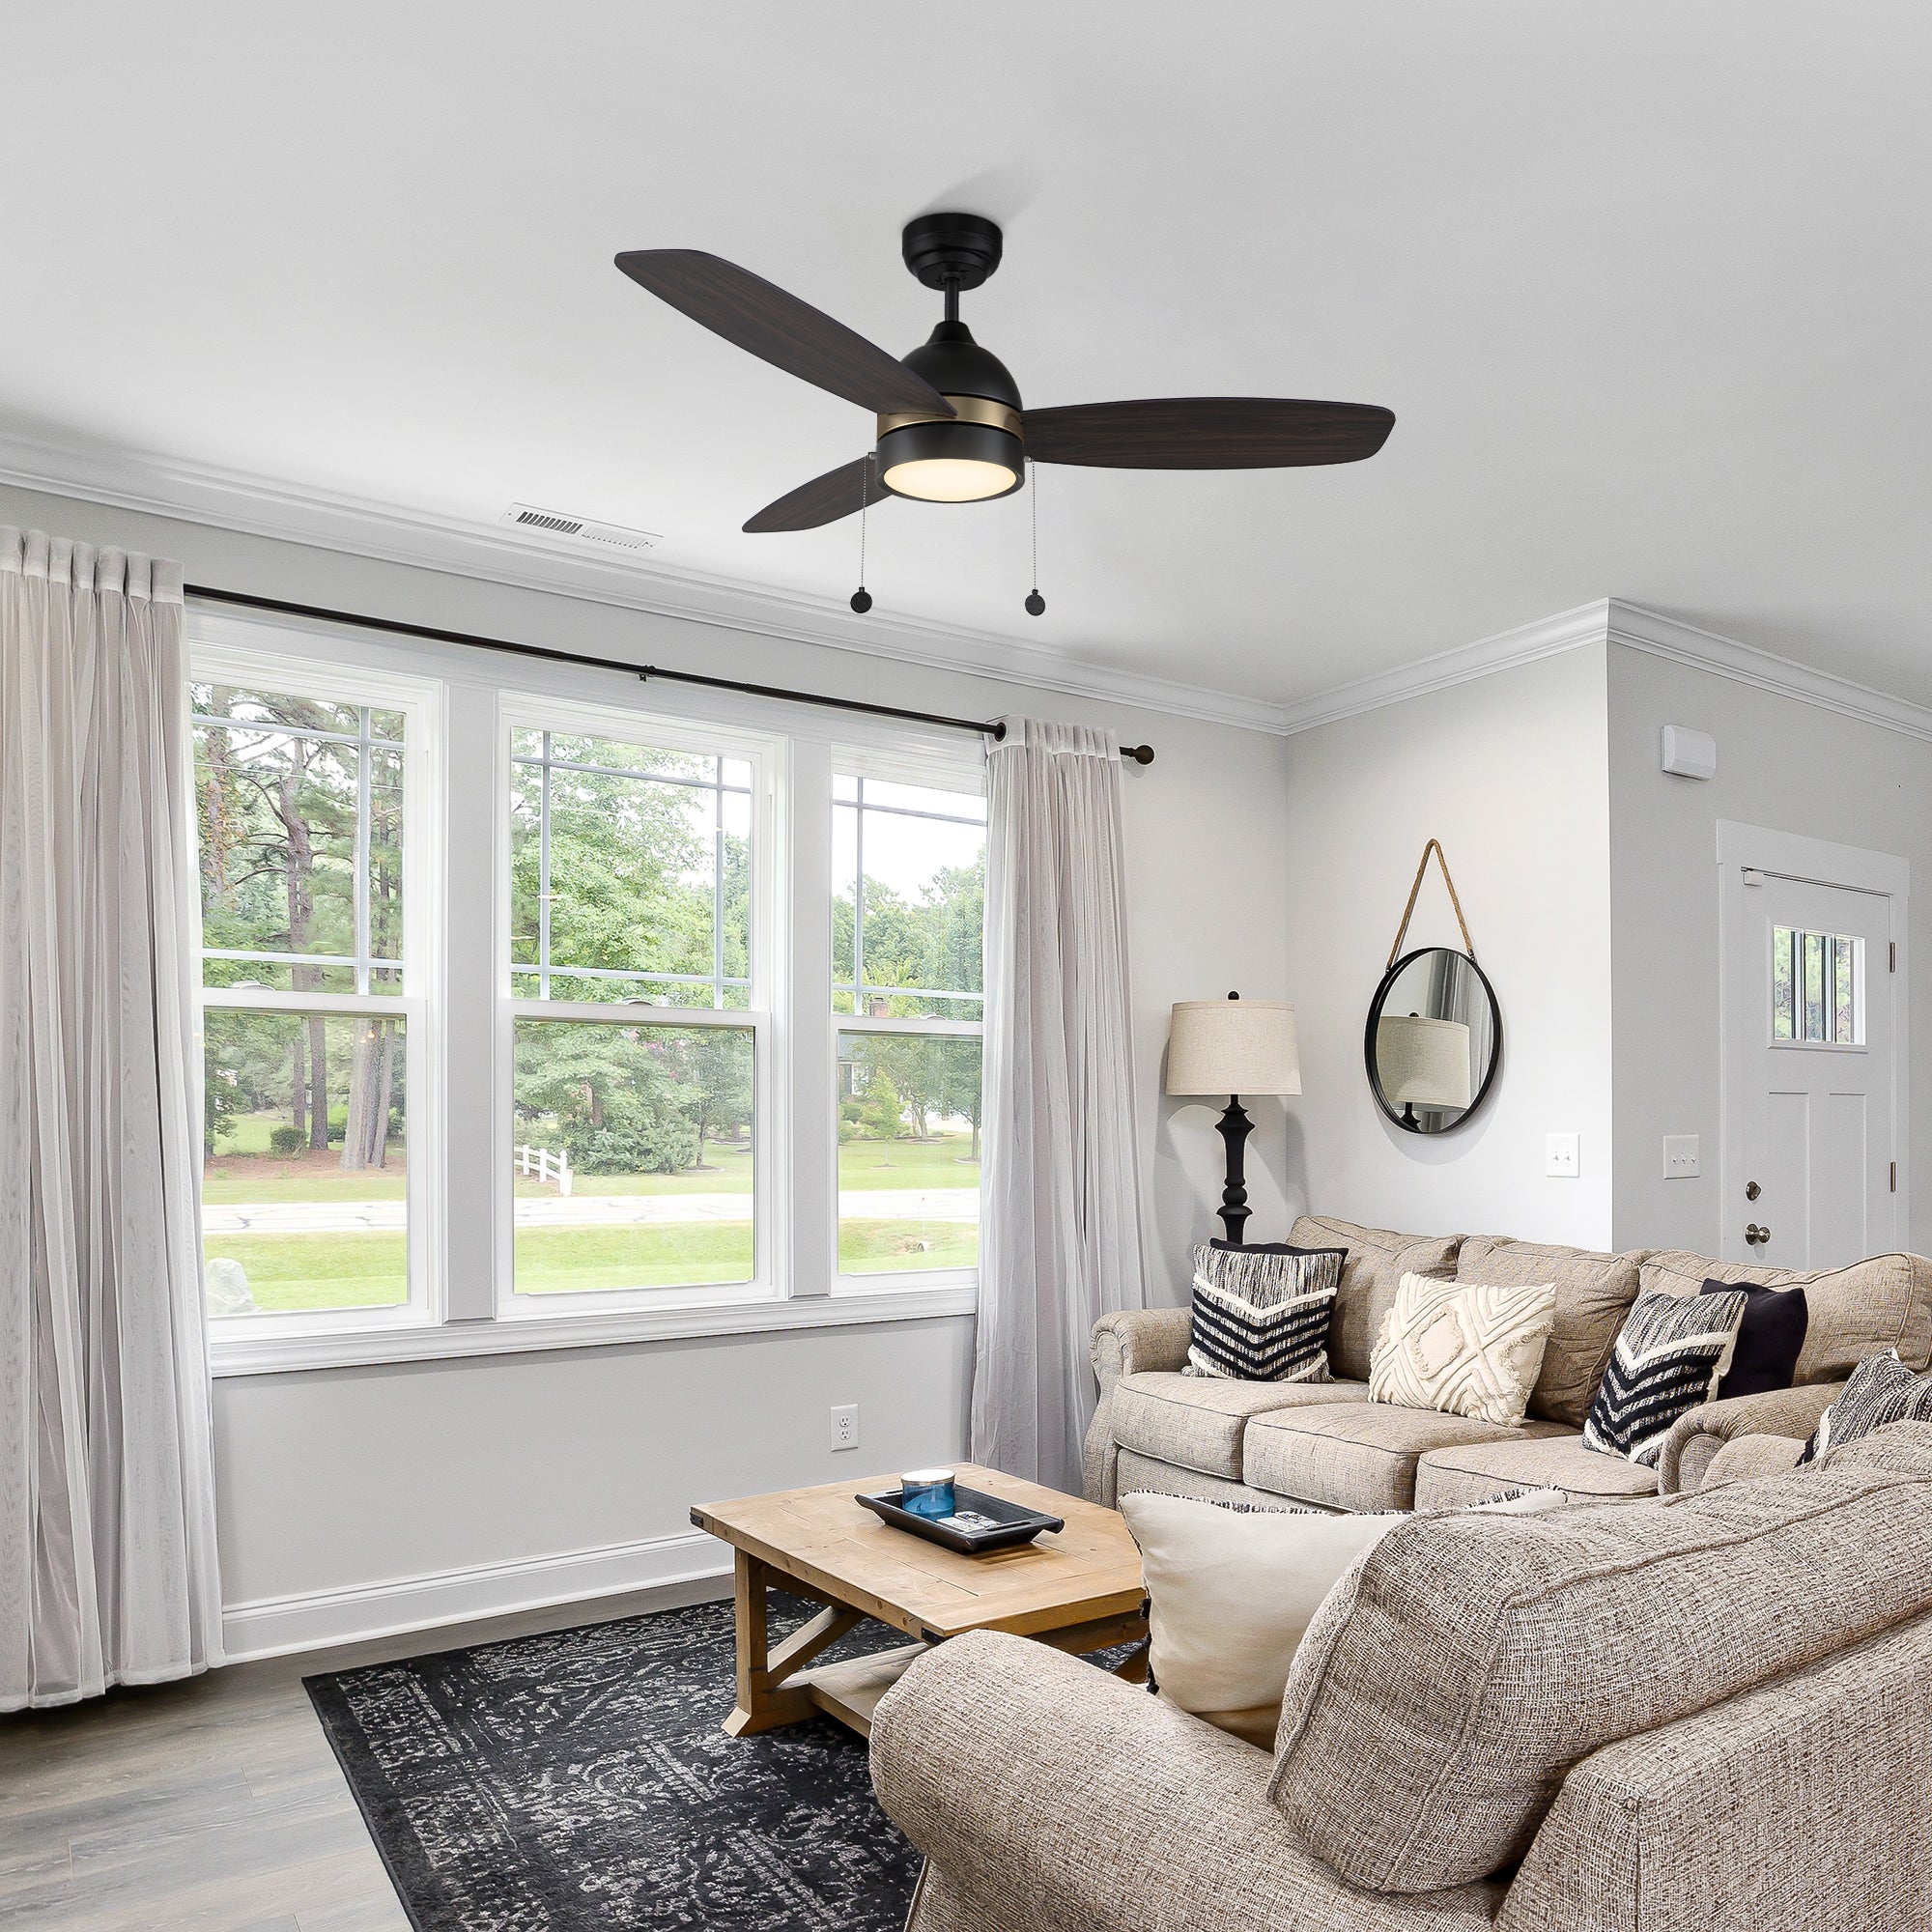 Convenient pull-chain operation for easy fan speed adjustment. Carro Tesoro 52 inch pull chain ceiling fan adds a touch of elegance and optimal air circulation to the living room. #color_Dark-Wood